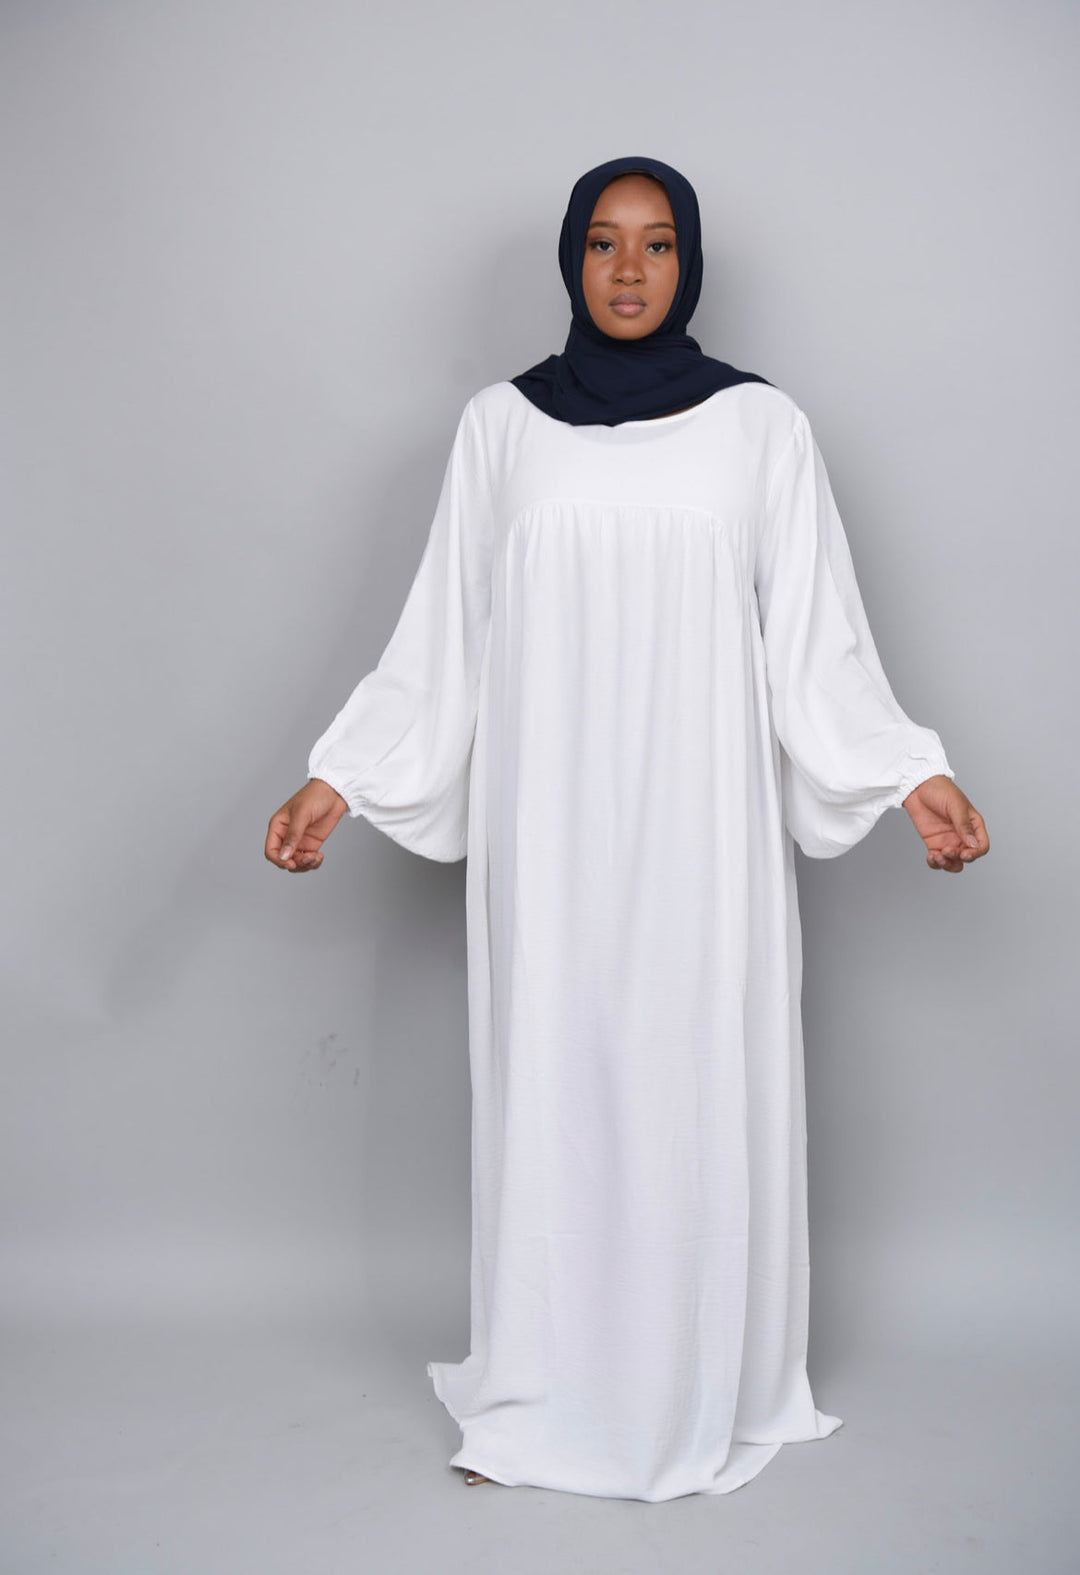 Get trendy with Amelia Textured Abaya - White -  available at Voilee NY. Grab yours for $54.90 today!